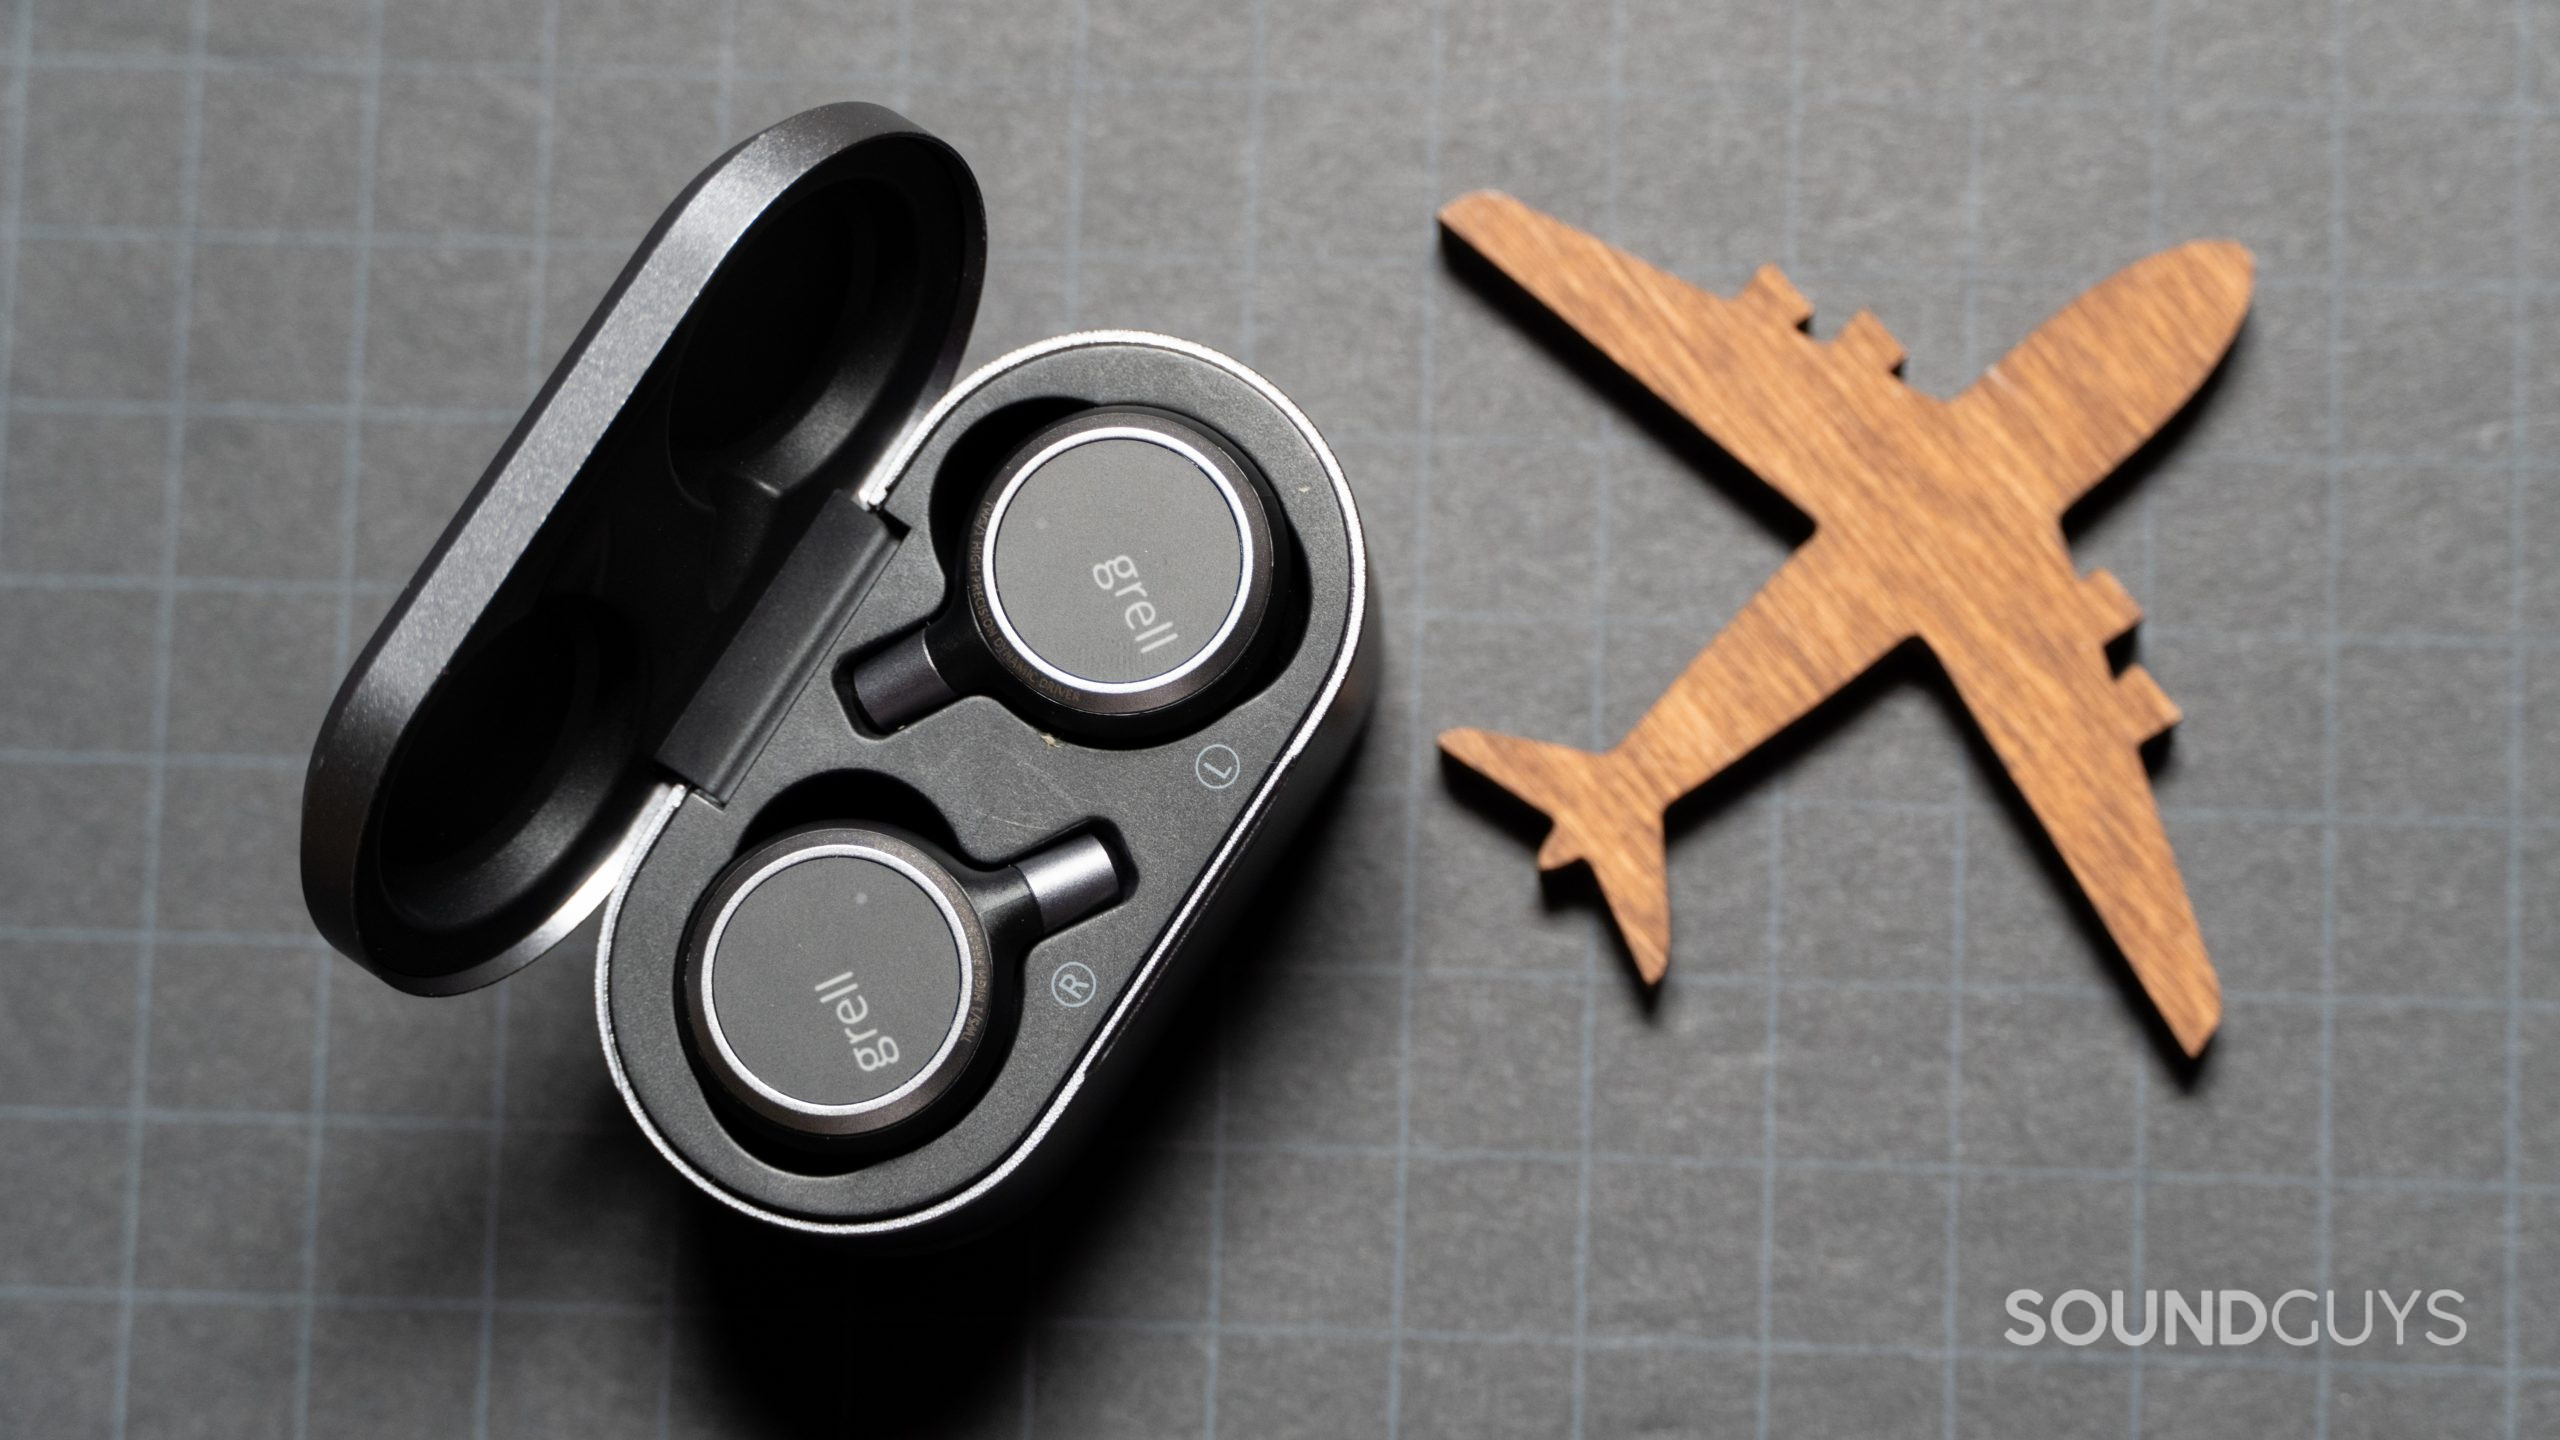 Grell Audio TWS 1 earbuds in case next to a paper airplane cutout.